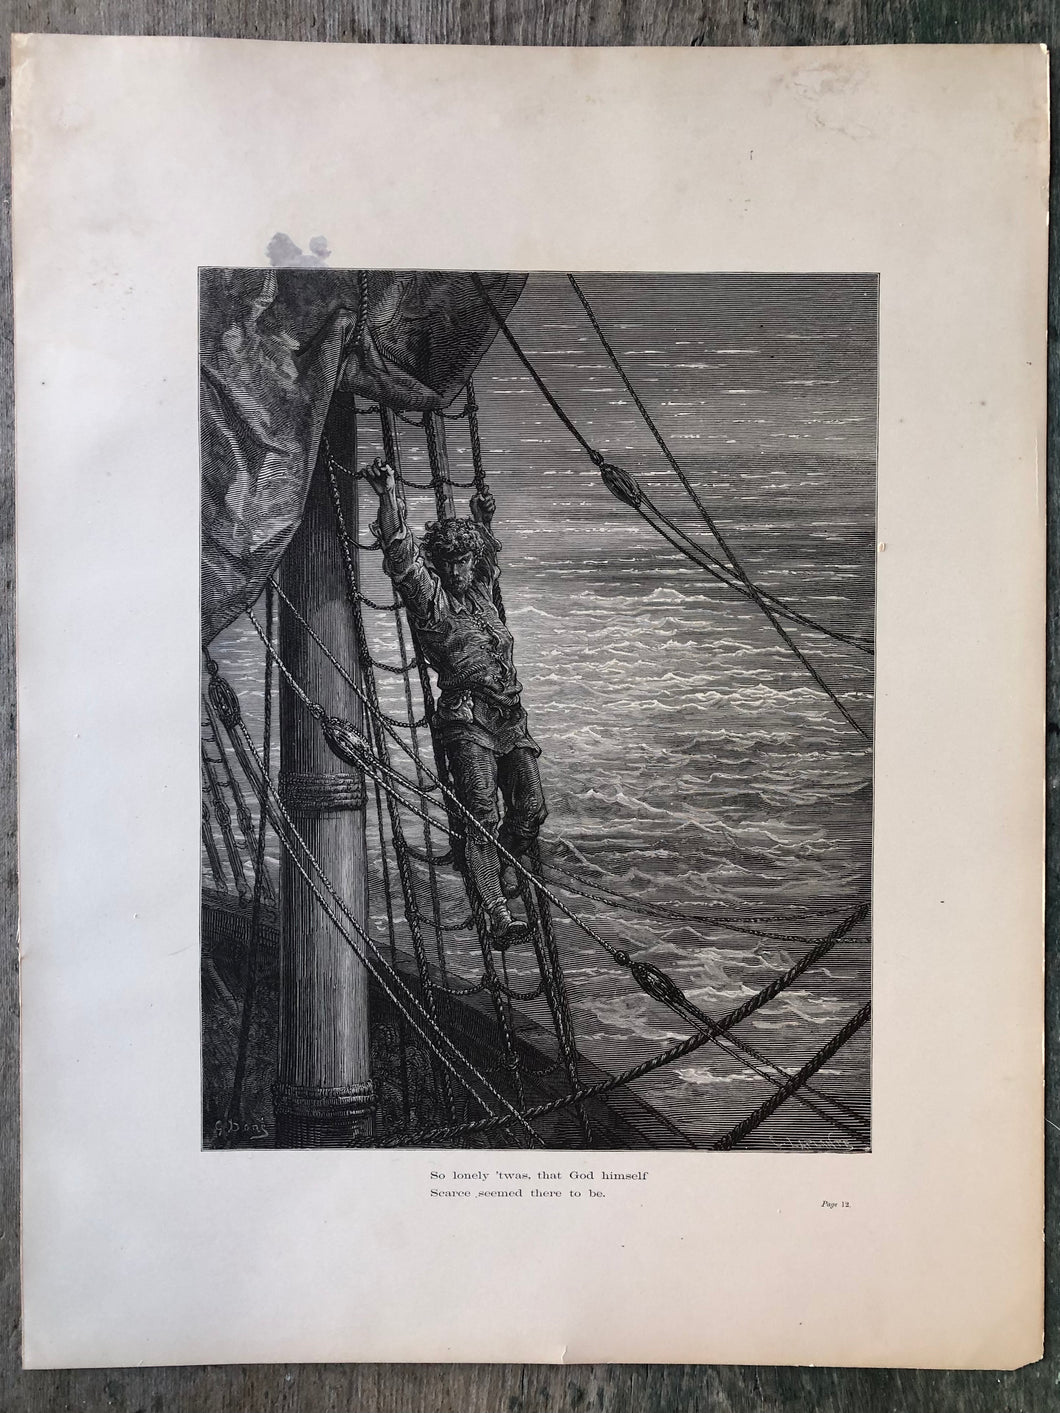 Gustave Dore Print from the Rime of the Ancient Mariner by Samuel Taylor Coleridge